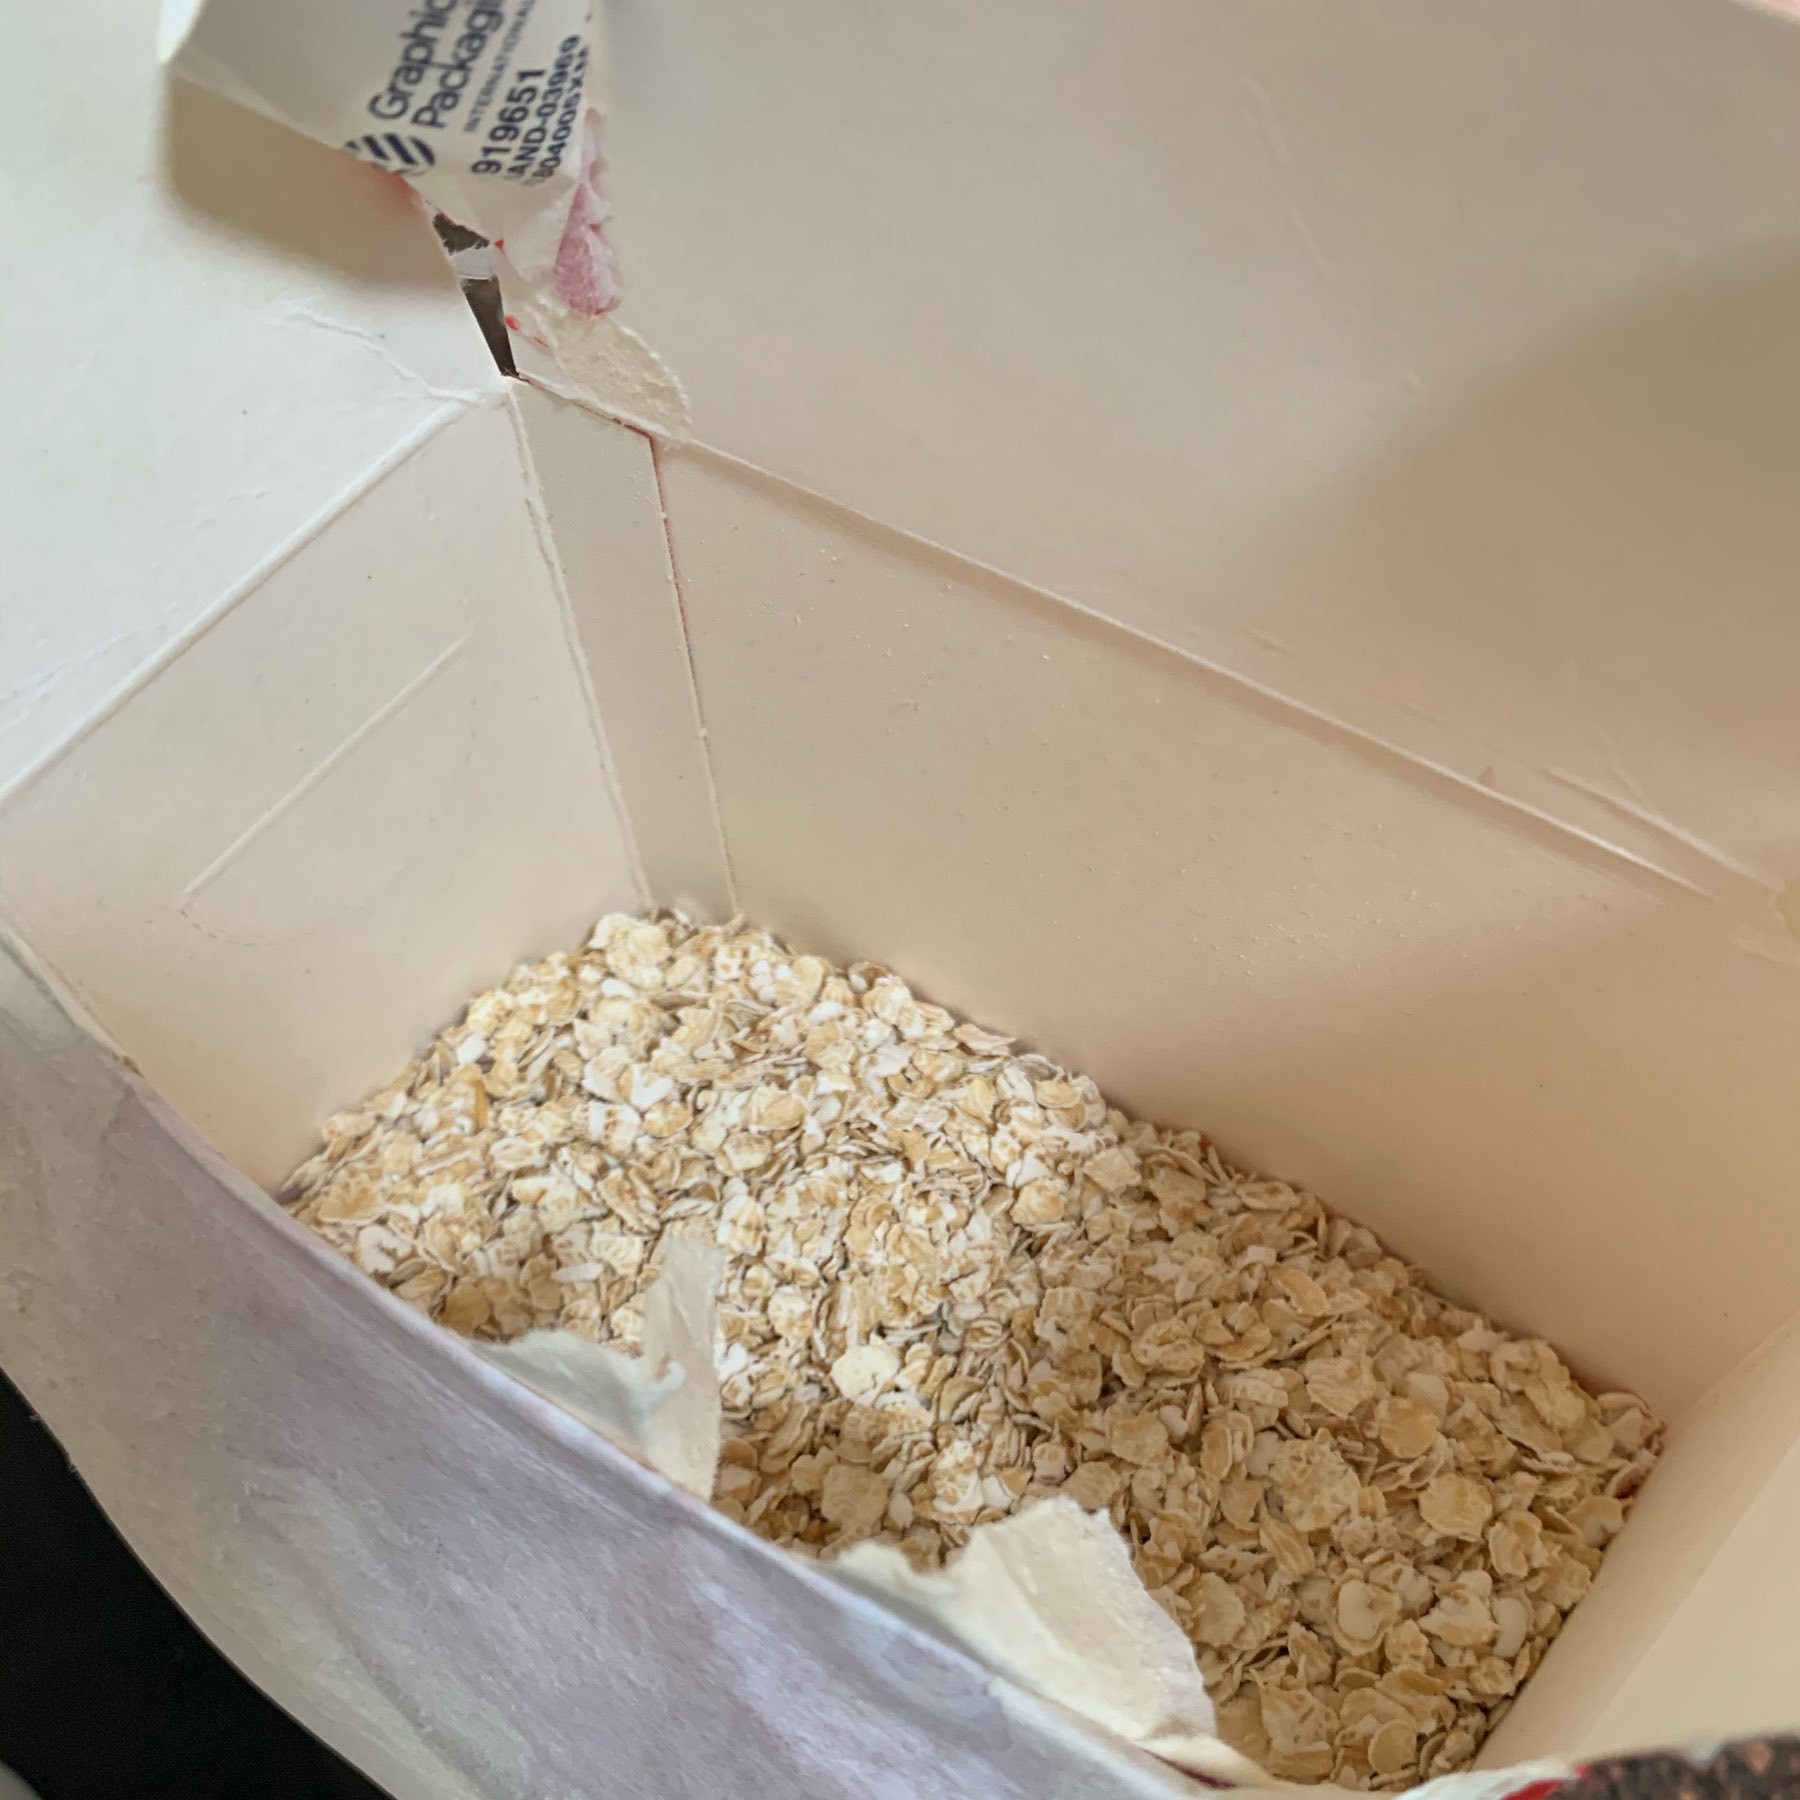 An open 500g box of Uncle Toby brand oats. there is no internal plastic bag. 